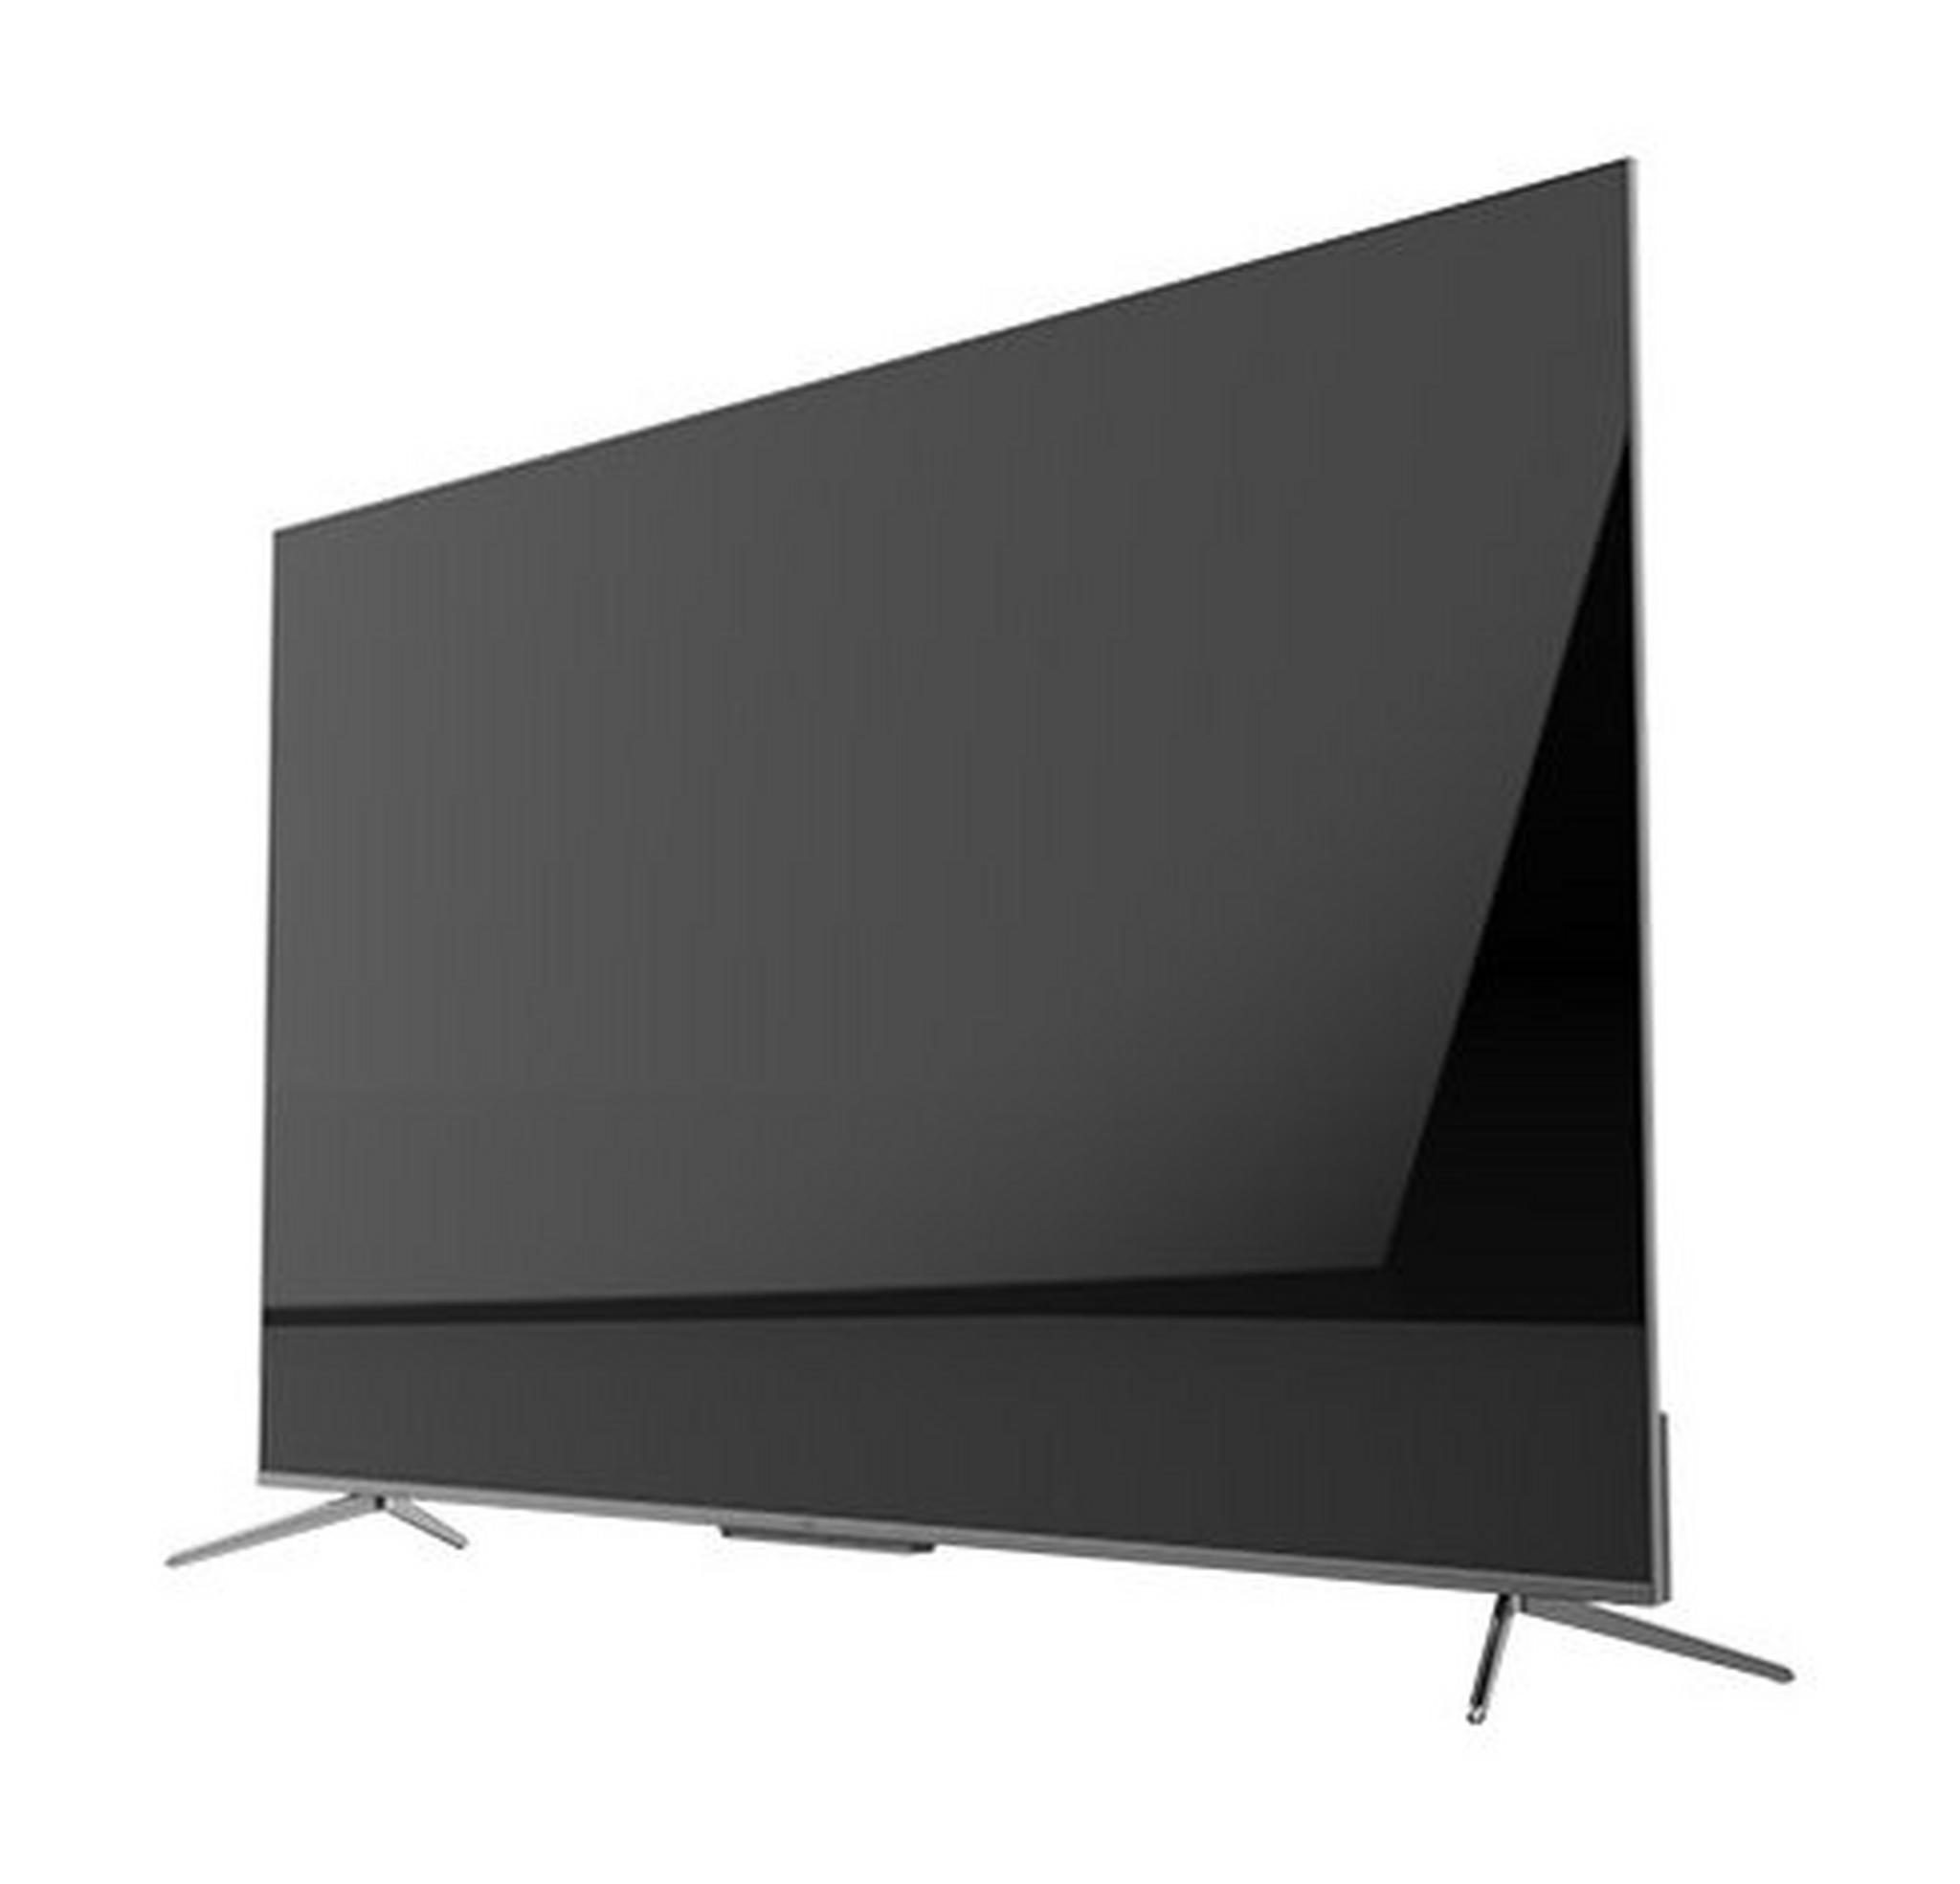 TCL 55-inch Smart QLED UHD Television - (55C715)